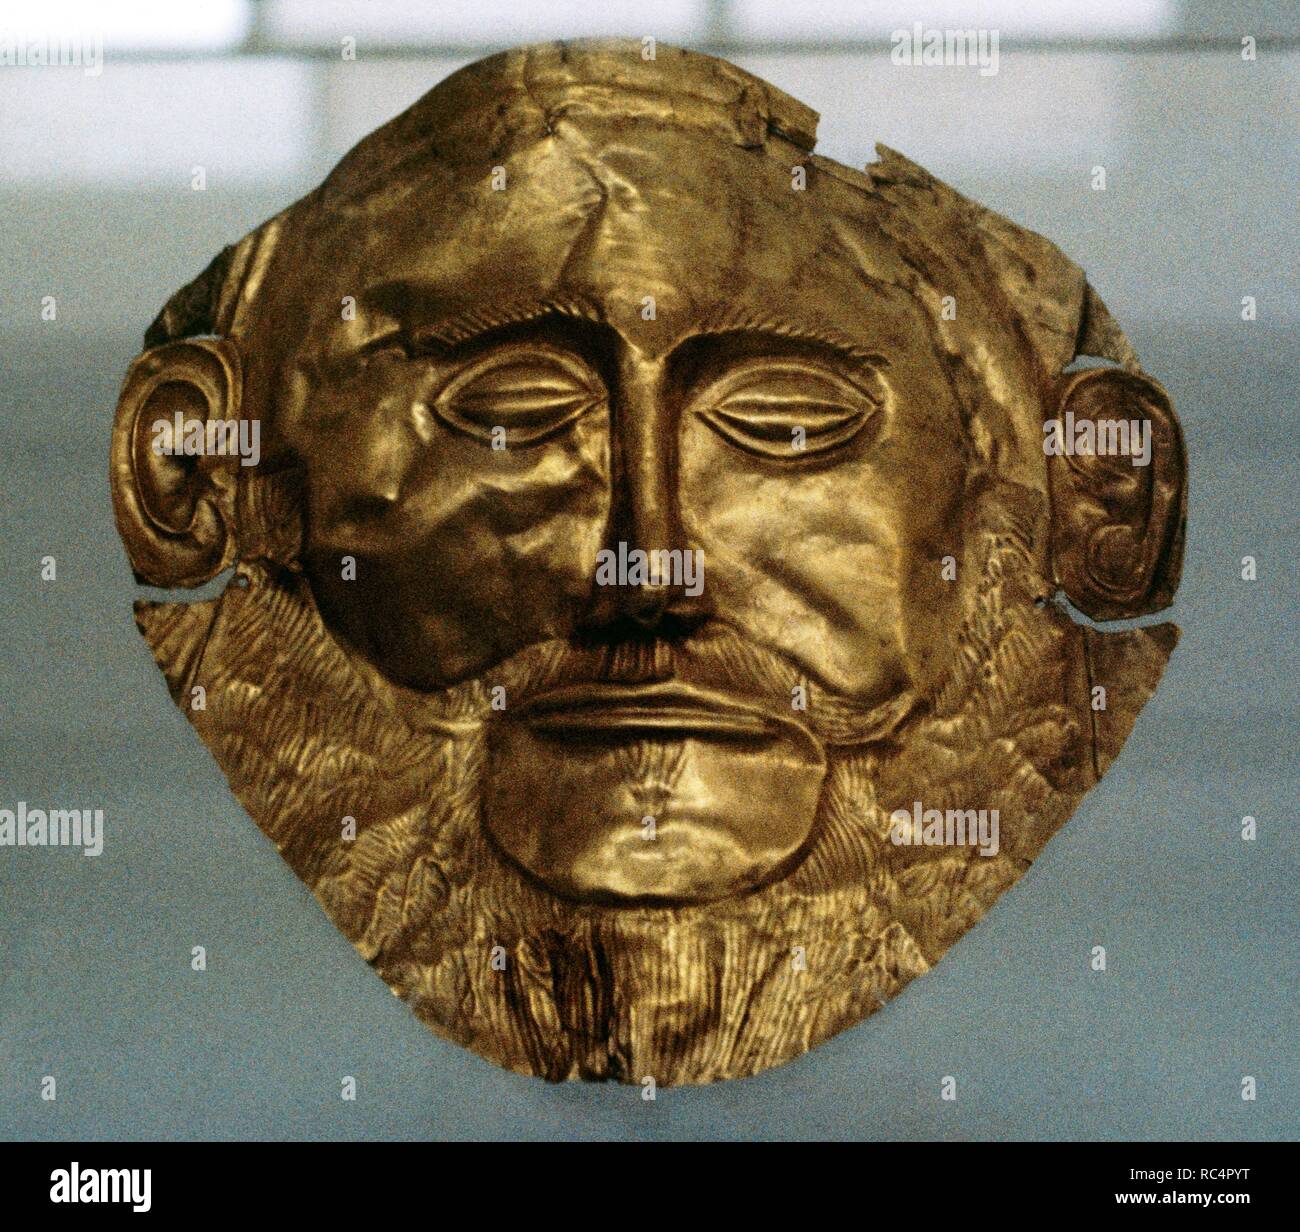 Mask of Agamemnon, gold funerary mask. Mycenaean funerary mask of an unknown Myceanean ruler, 16th century BC (ca.1550 BC), found in Tomb V, Grave Circle A at Mycenae. National Archaeological Museum. Athens, Greece. Stock Photo